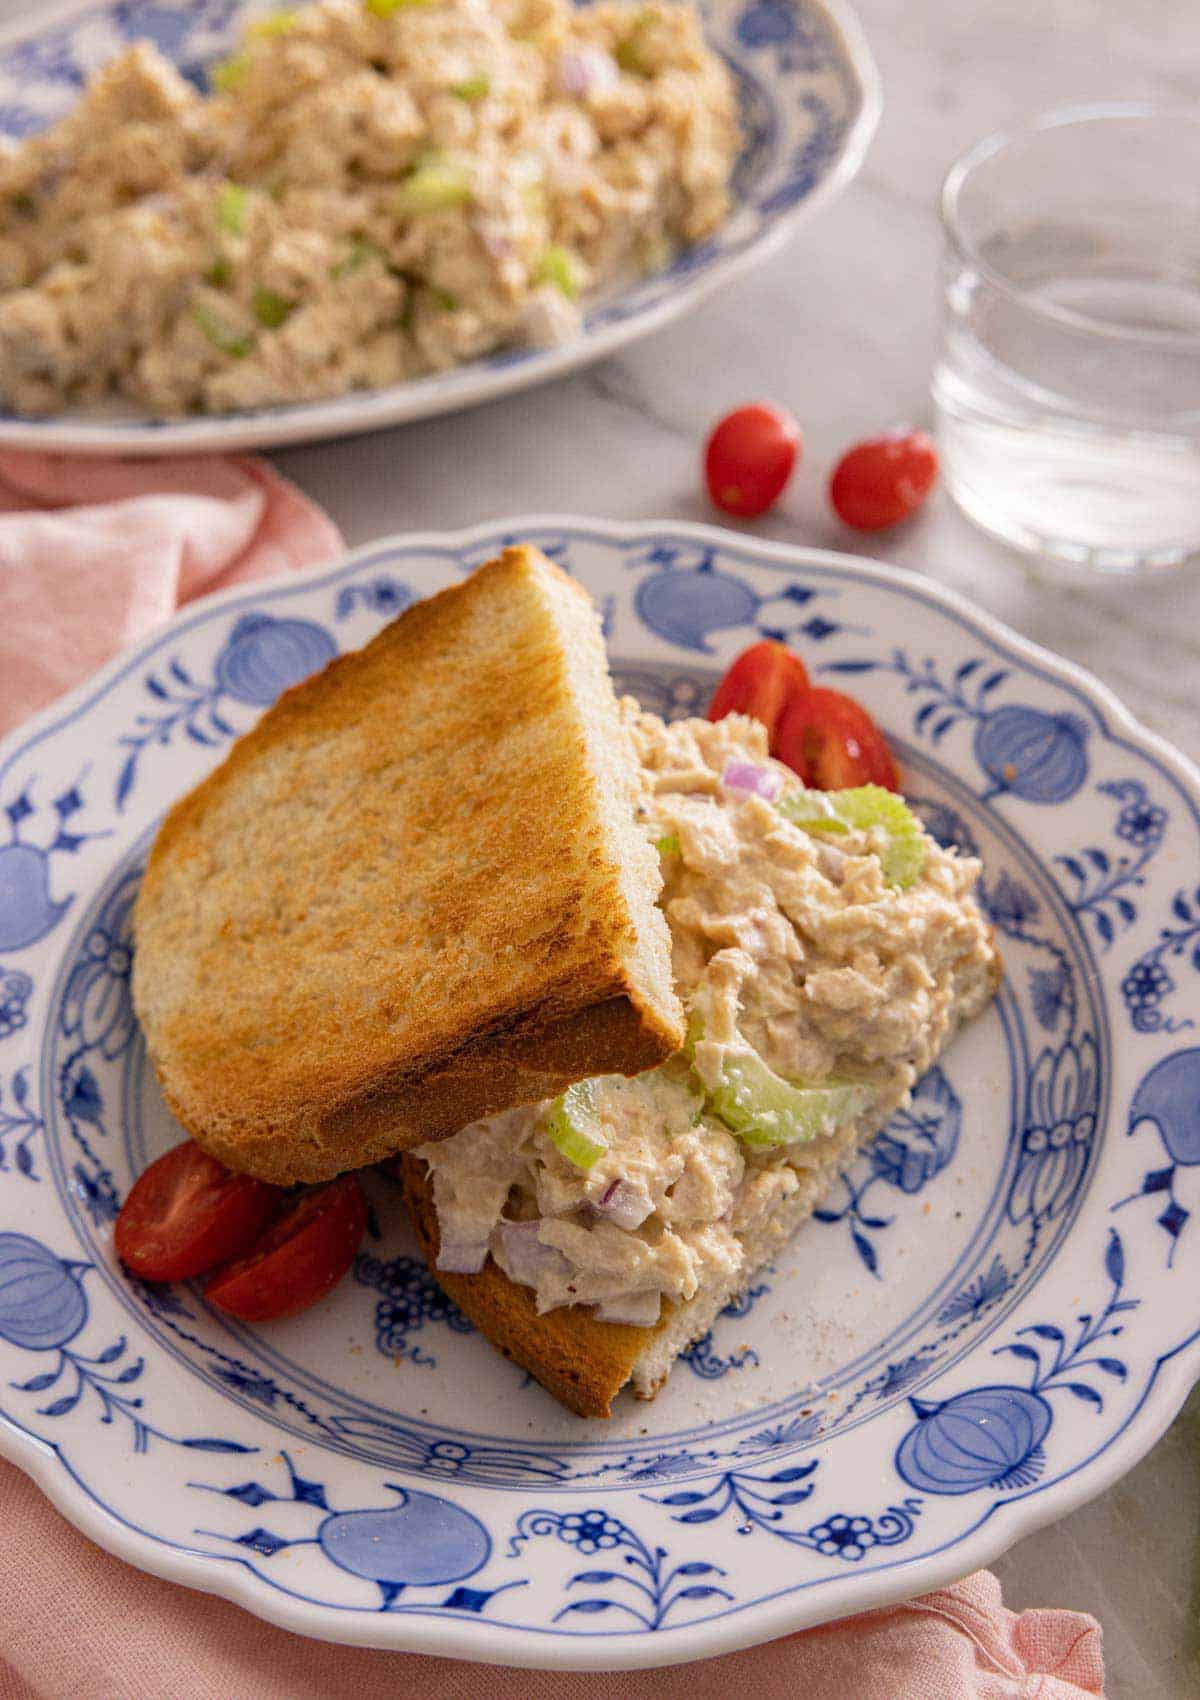 Tuna salad on toasted bread on a blue and white plate.